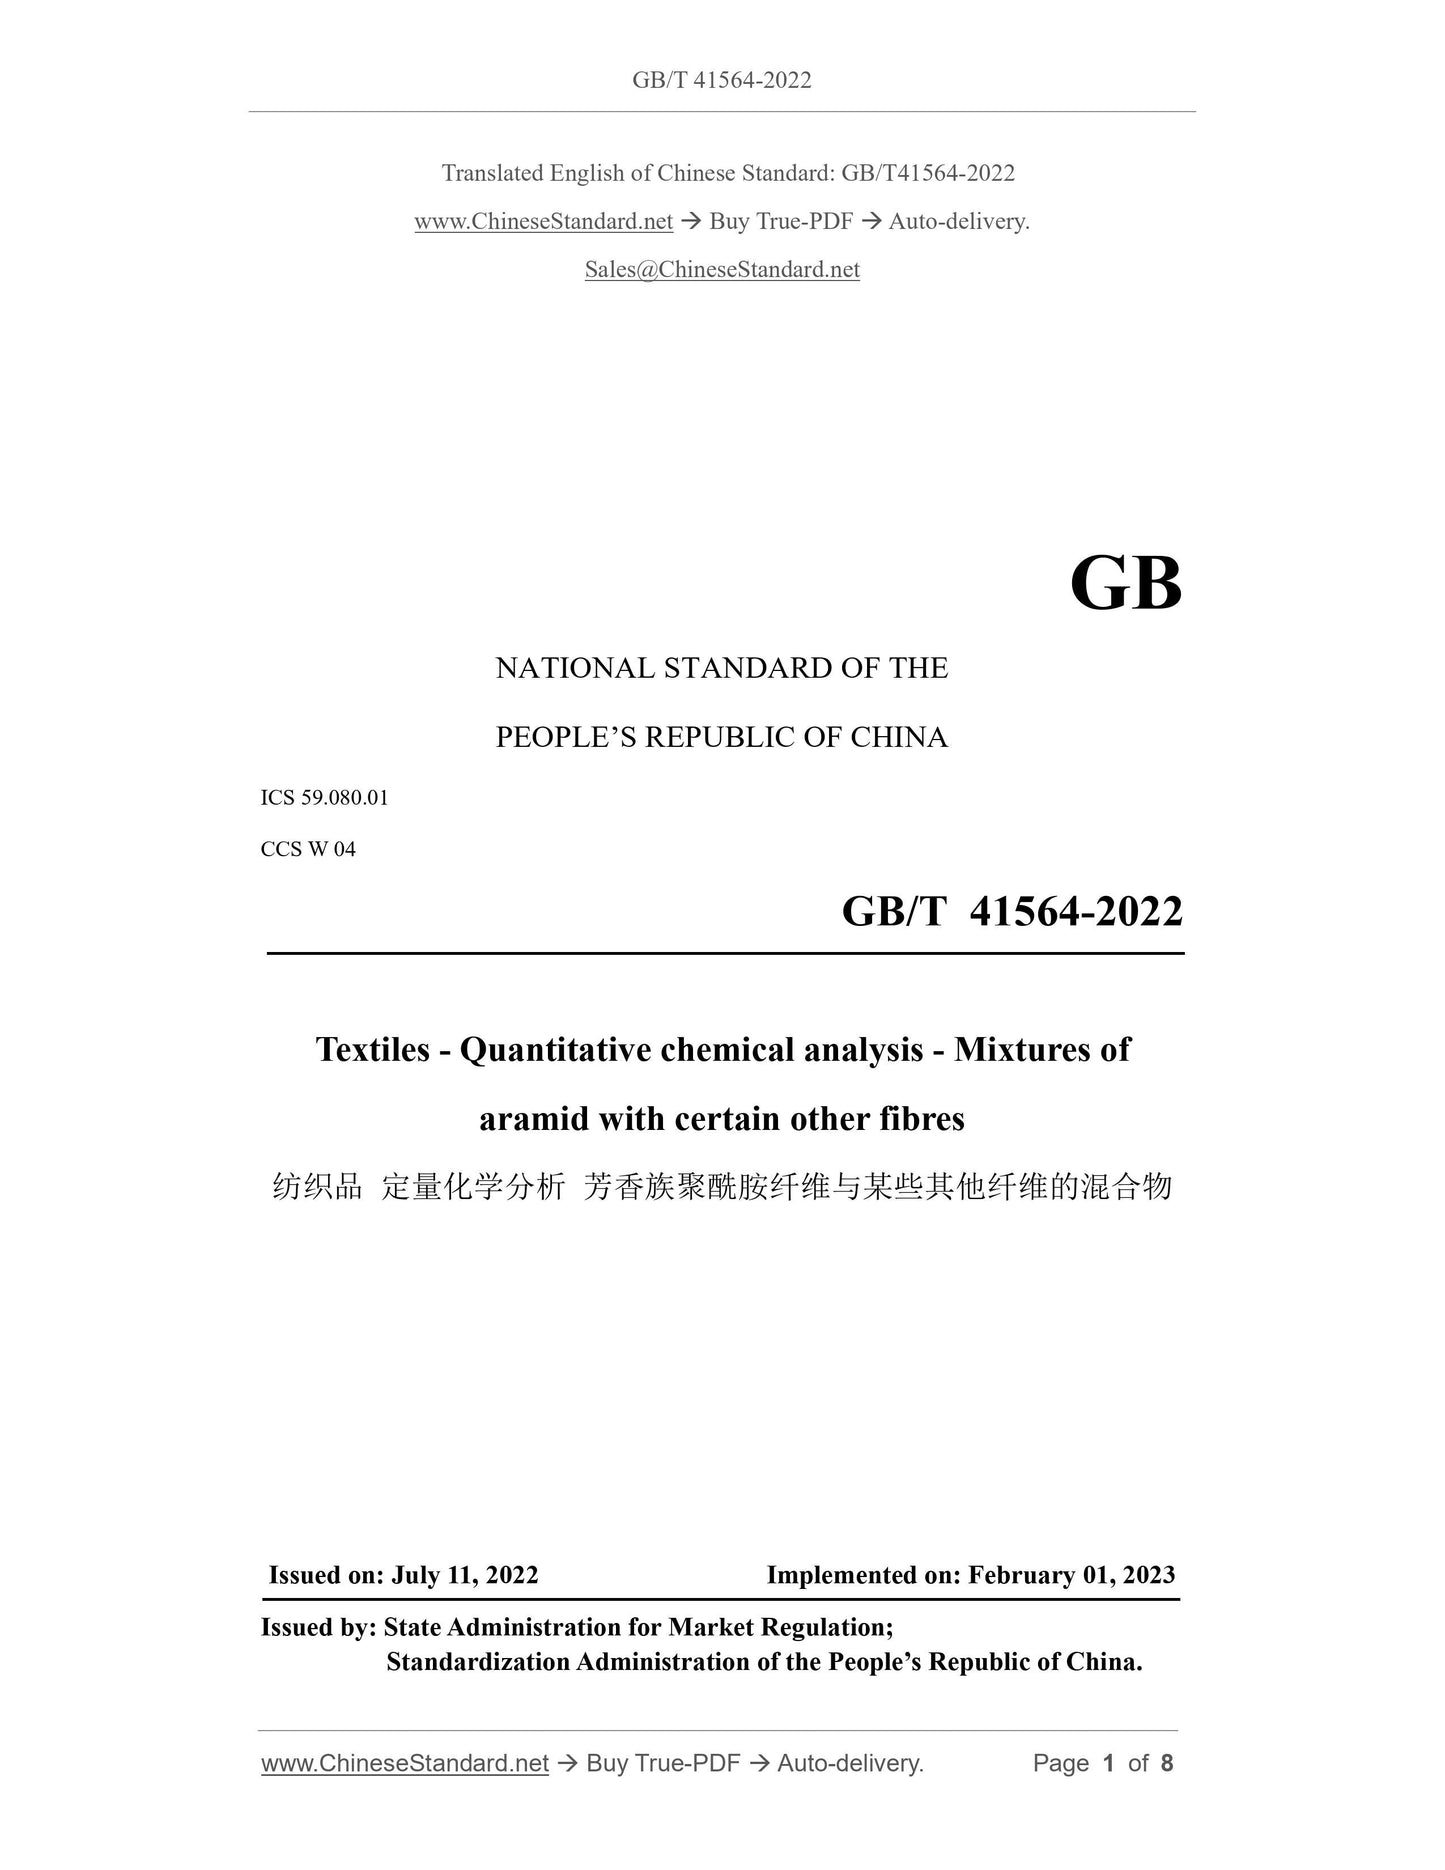 GB/T 41564-2022 Page 1